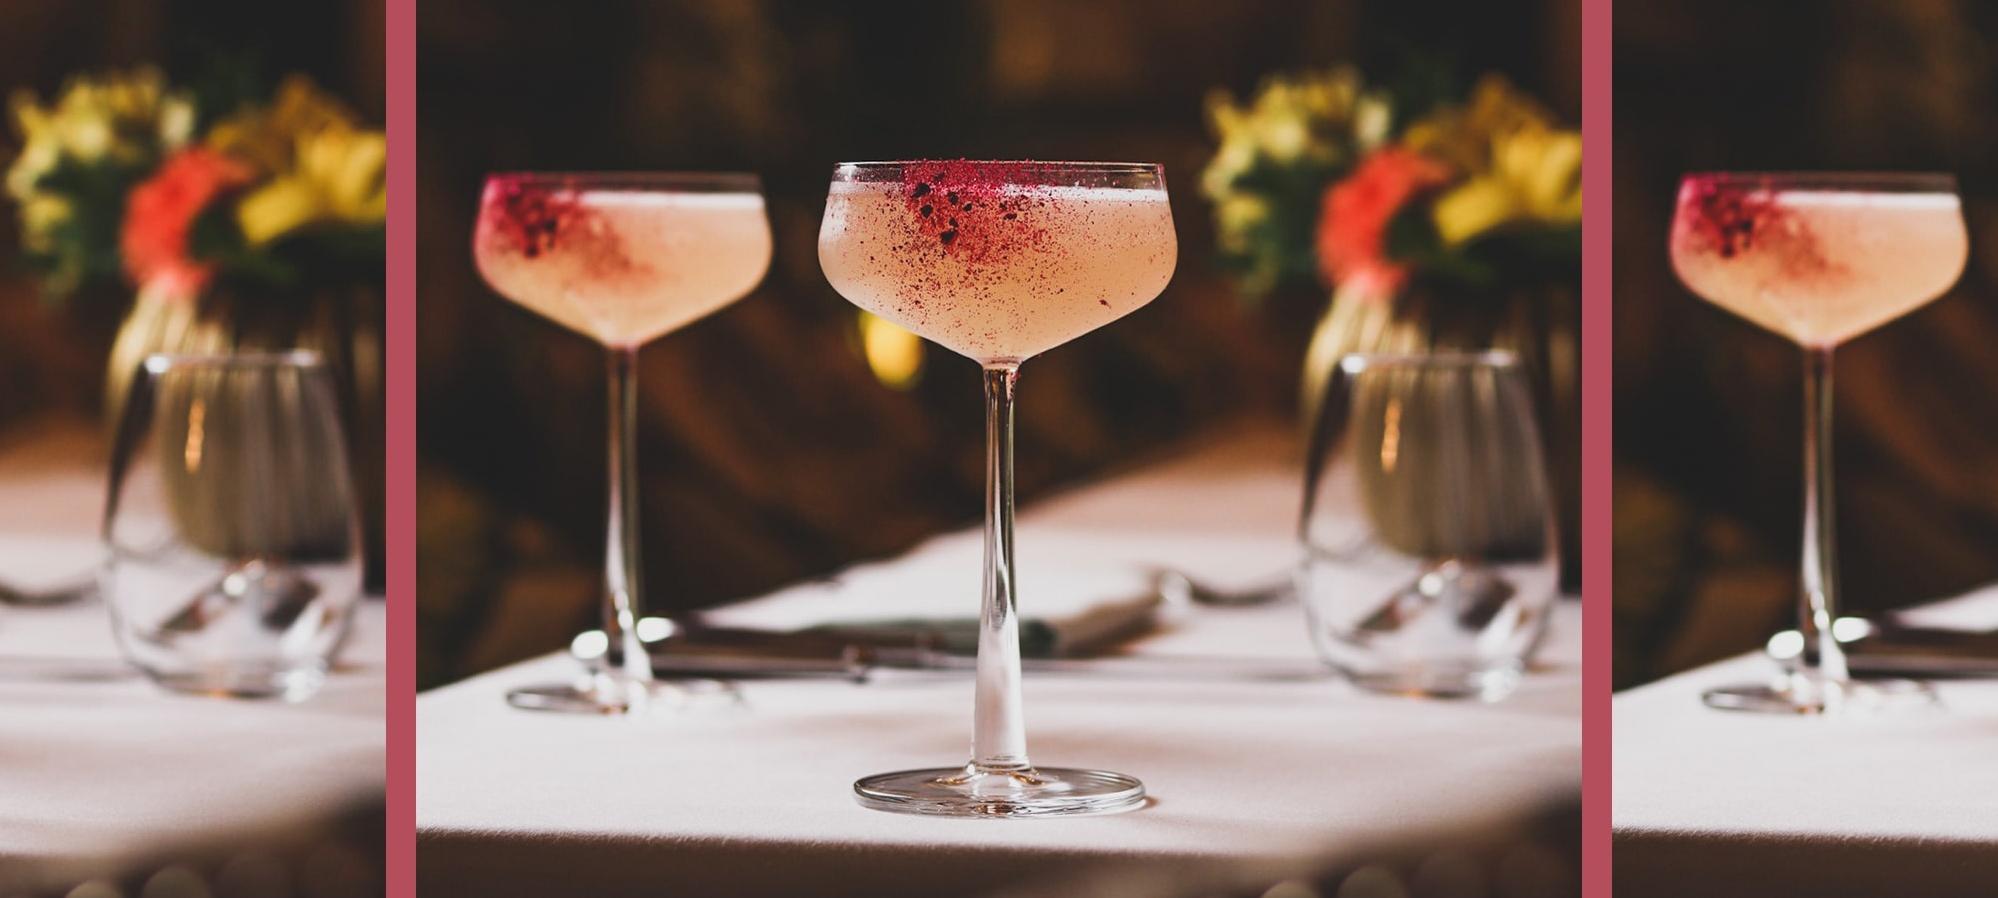  A blend of floral flavors, bubbly Champagne, and a pop of raspberry, this cocktail is a true masterpiece.